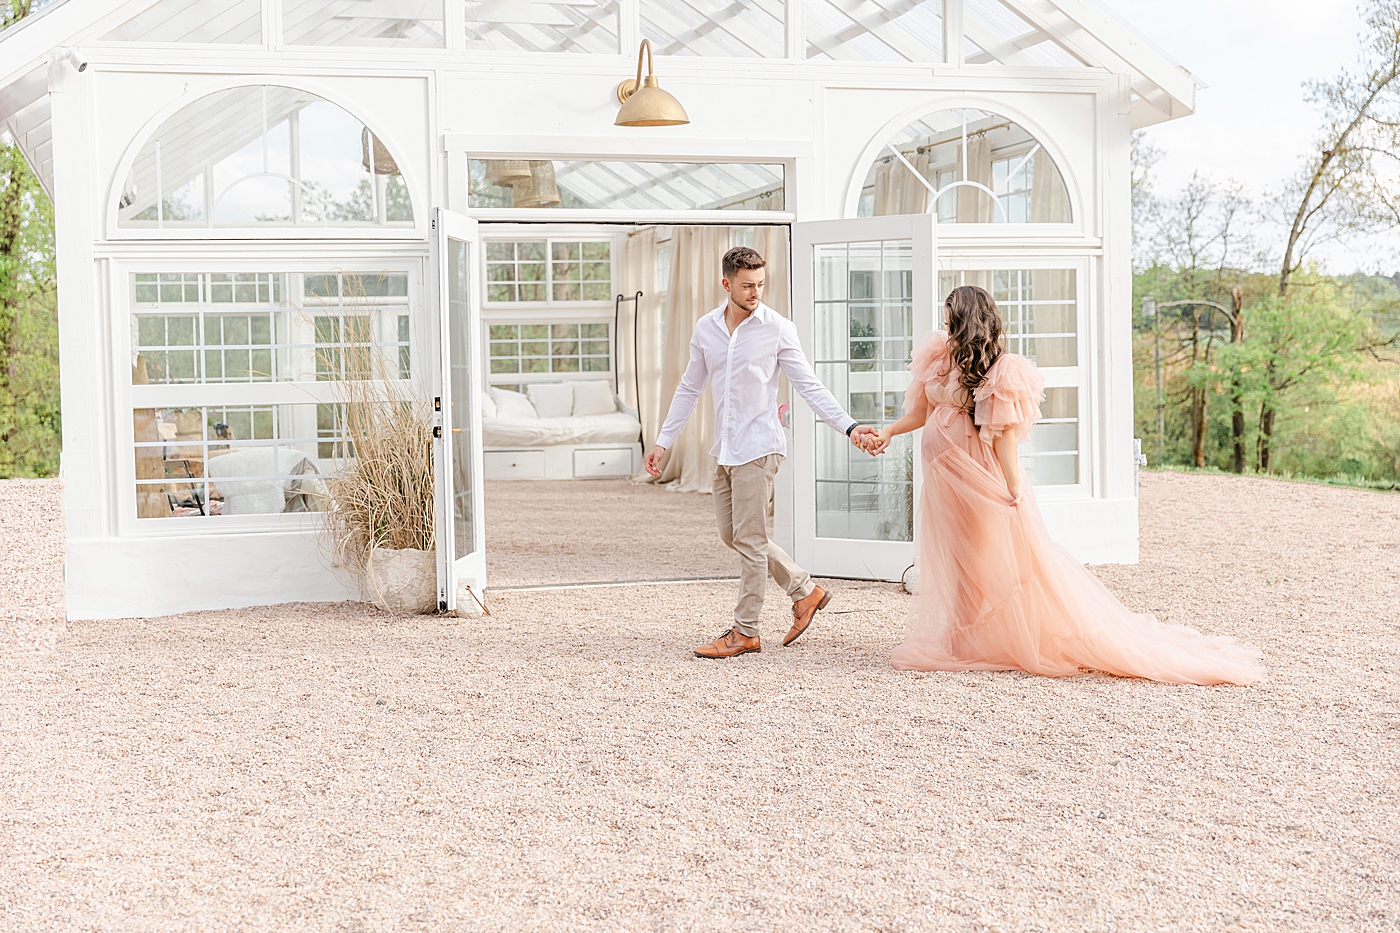 Couple holding hands walking in front of a greenhouse | Image by Chrissy Winchester